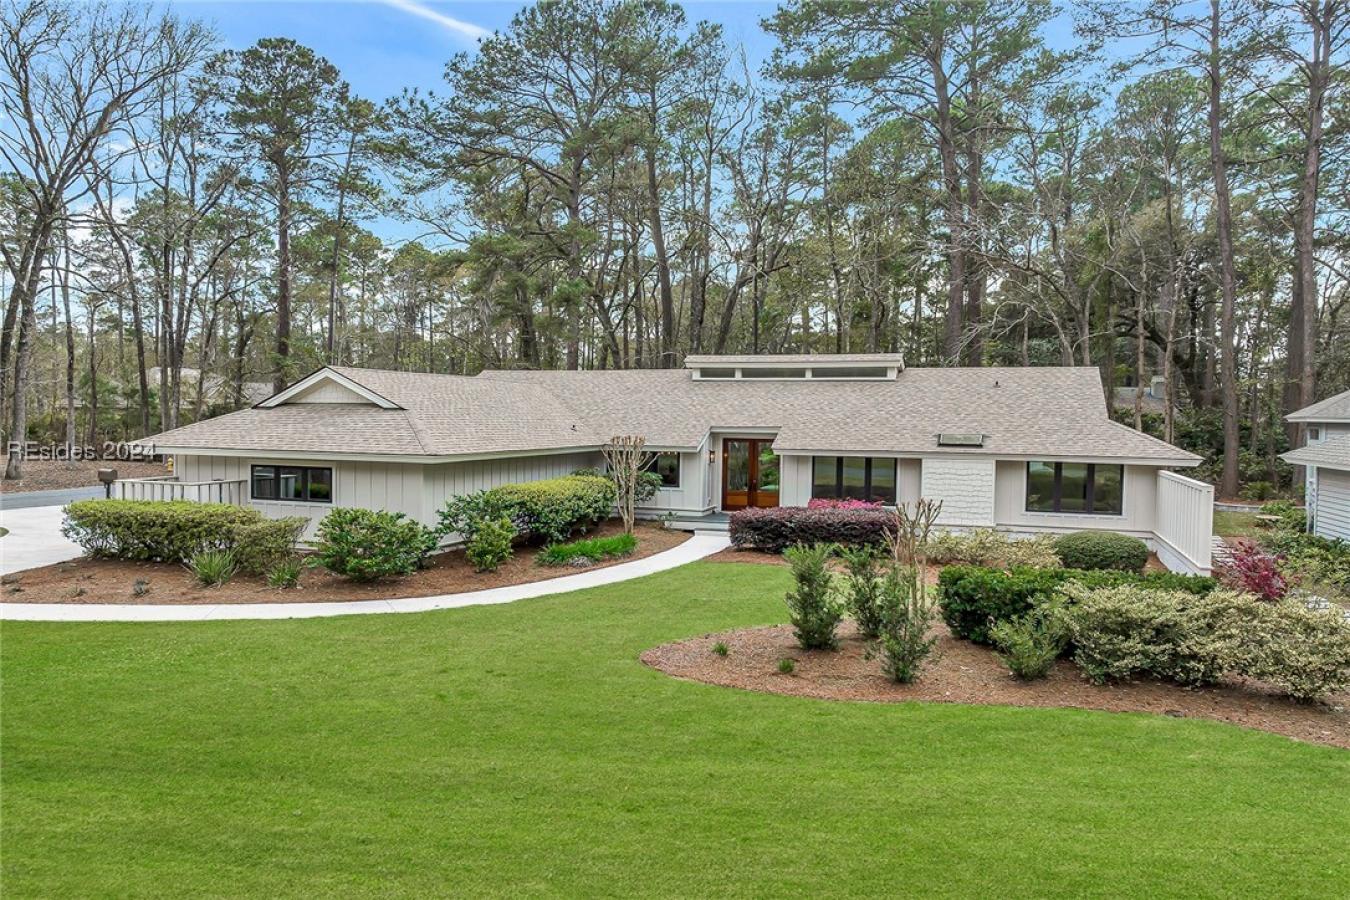 2 Coopers Hawk, Hilton Head Island, South Carolina, 29926, United States, 4 Bedrooms Bedrooms, ,3 BathroomsBathrooms,Residential,For Sale,2 Coopers Hawk,1490505